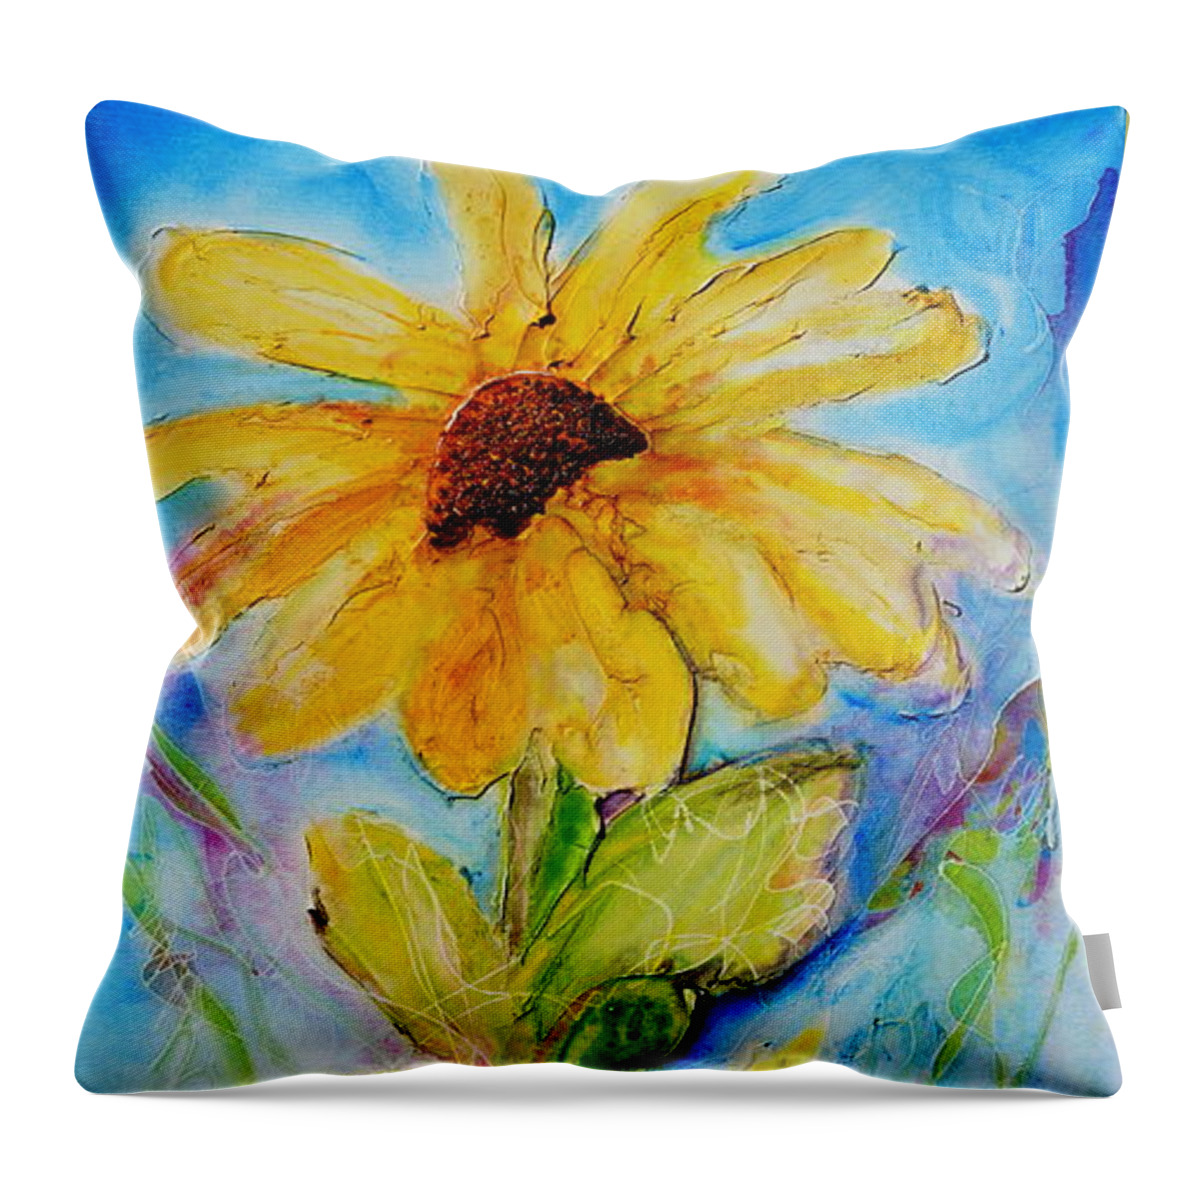 Abstract Throw Pillow featuring the painting Black Eyed Susan by Theresa Marie Johnson